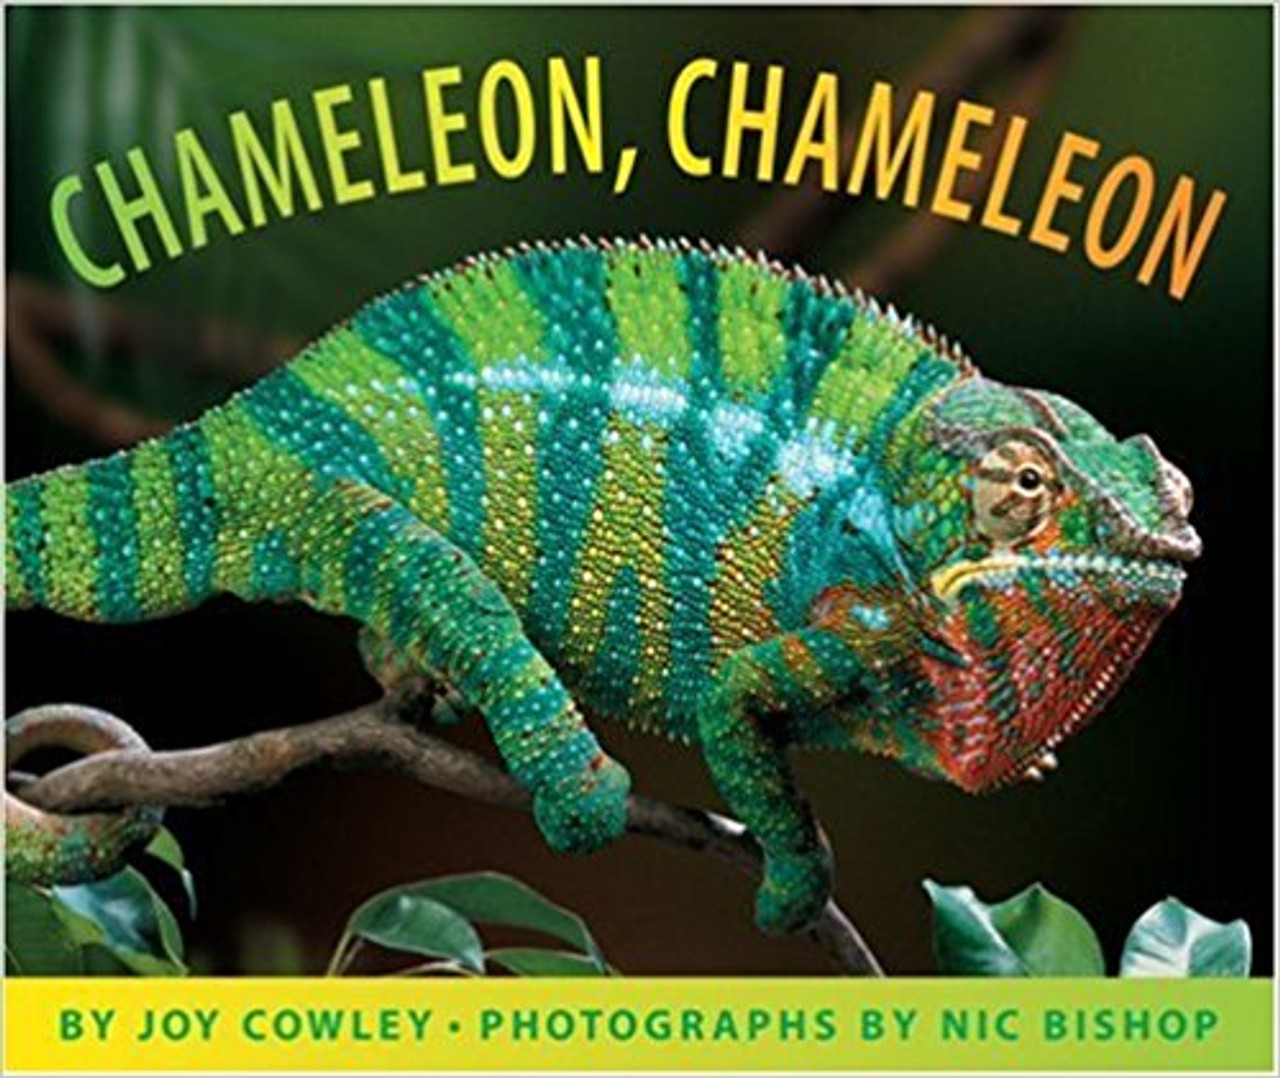 Young readers can experience the many moods (and colors) of one of the planet's most captivating creatures in this book filled with incredible photographs and simple text. Full color.